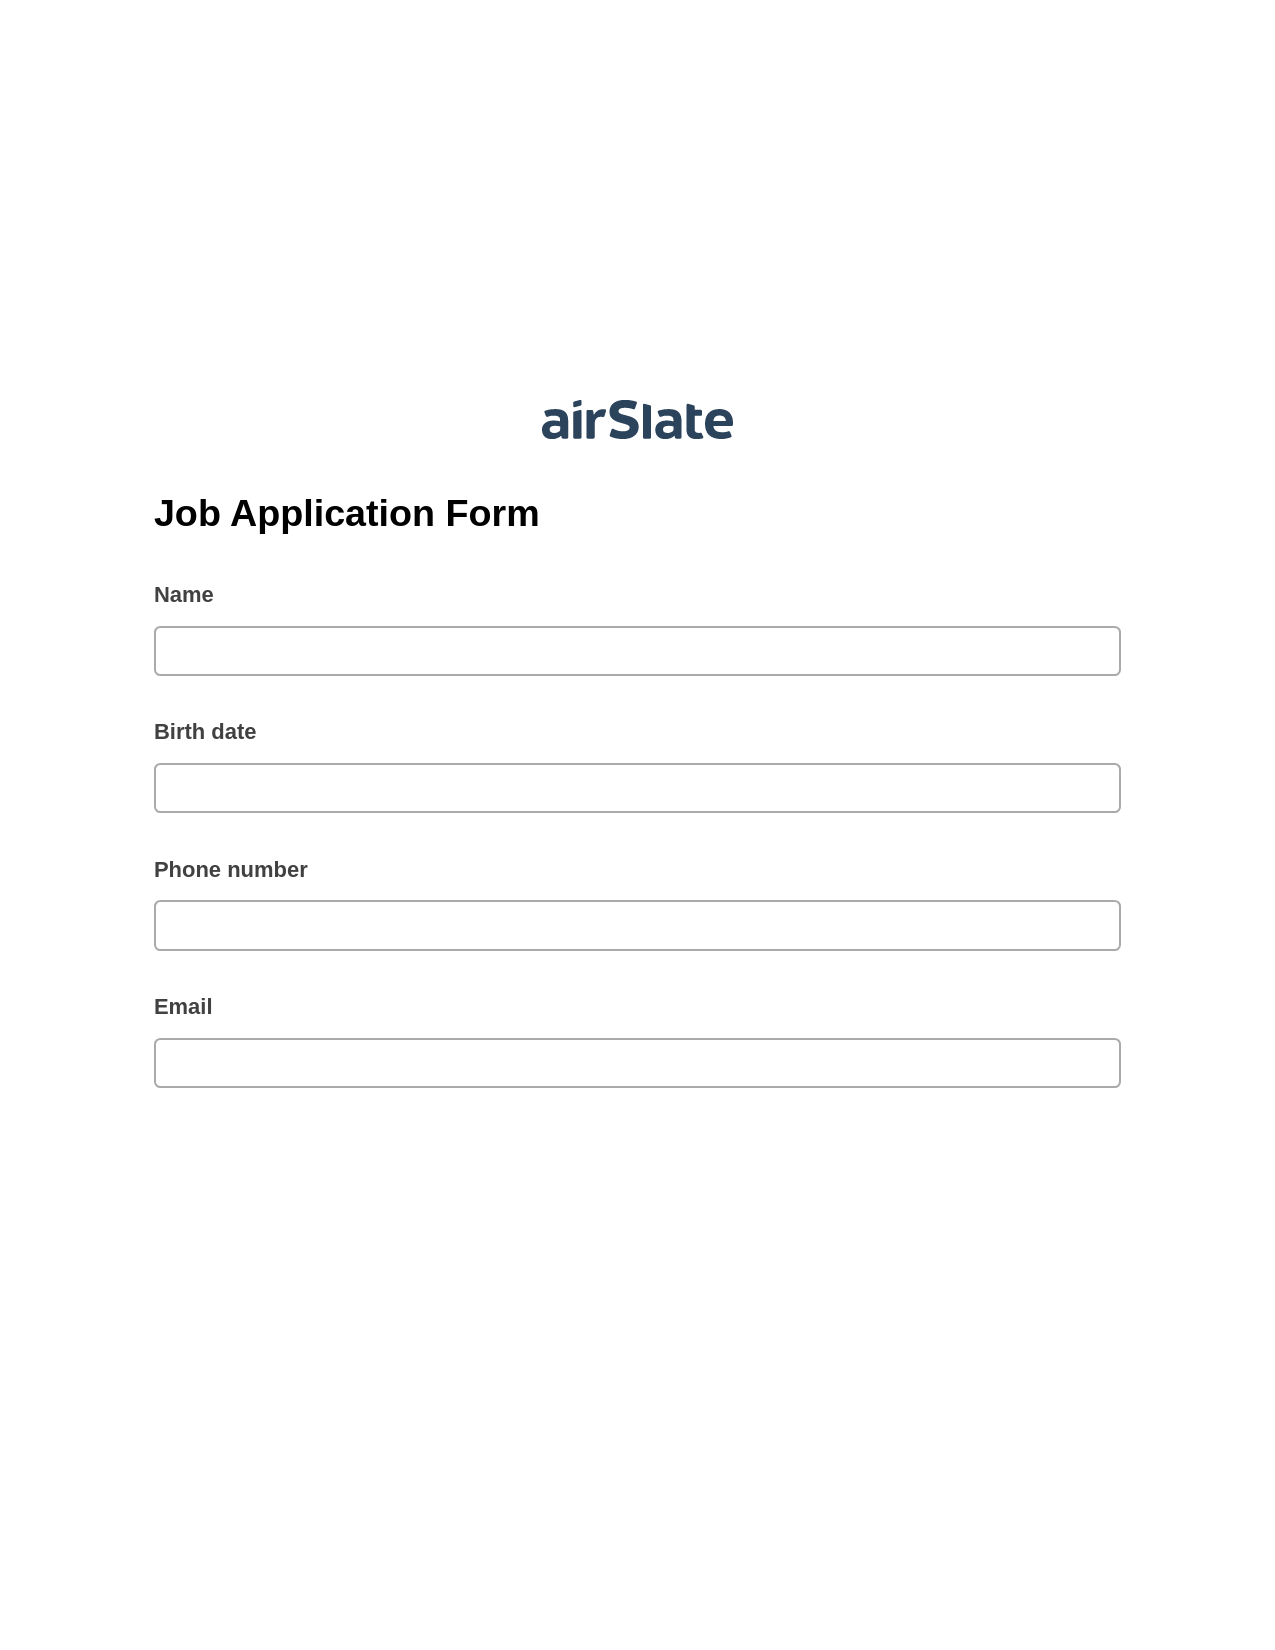 Multirole Job Application Form Pre-fill from another Slate Bot, Create slate bot, OneDrive Bot